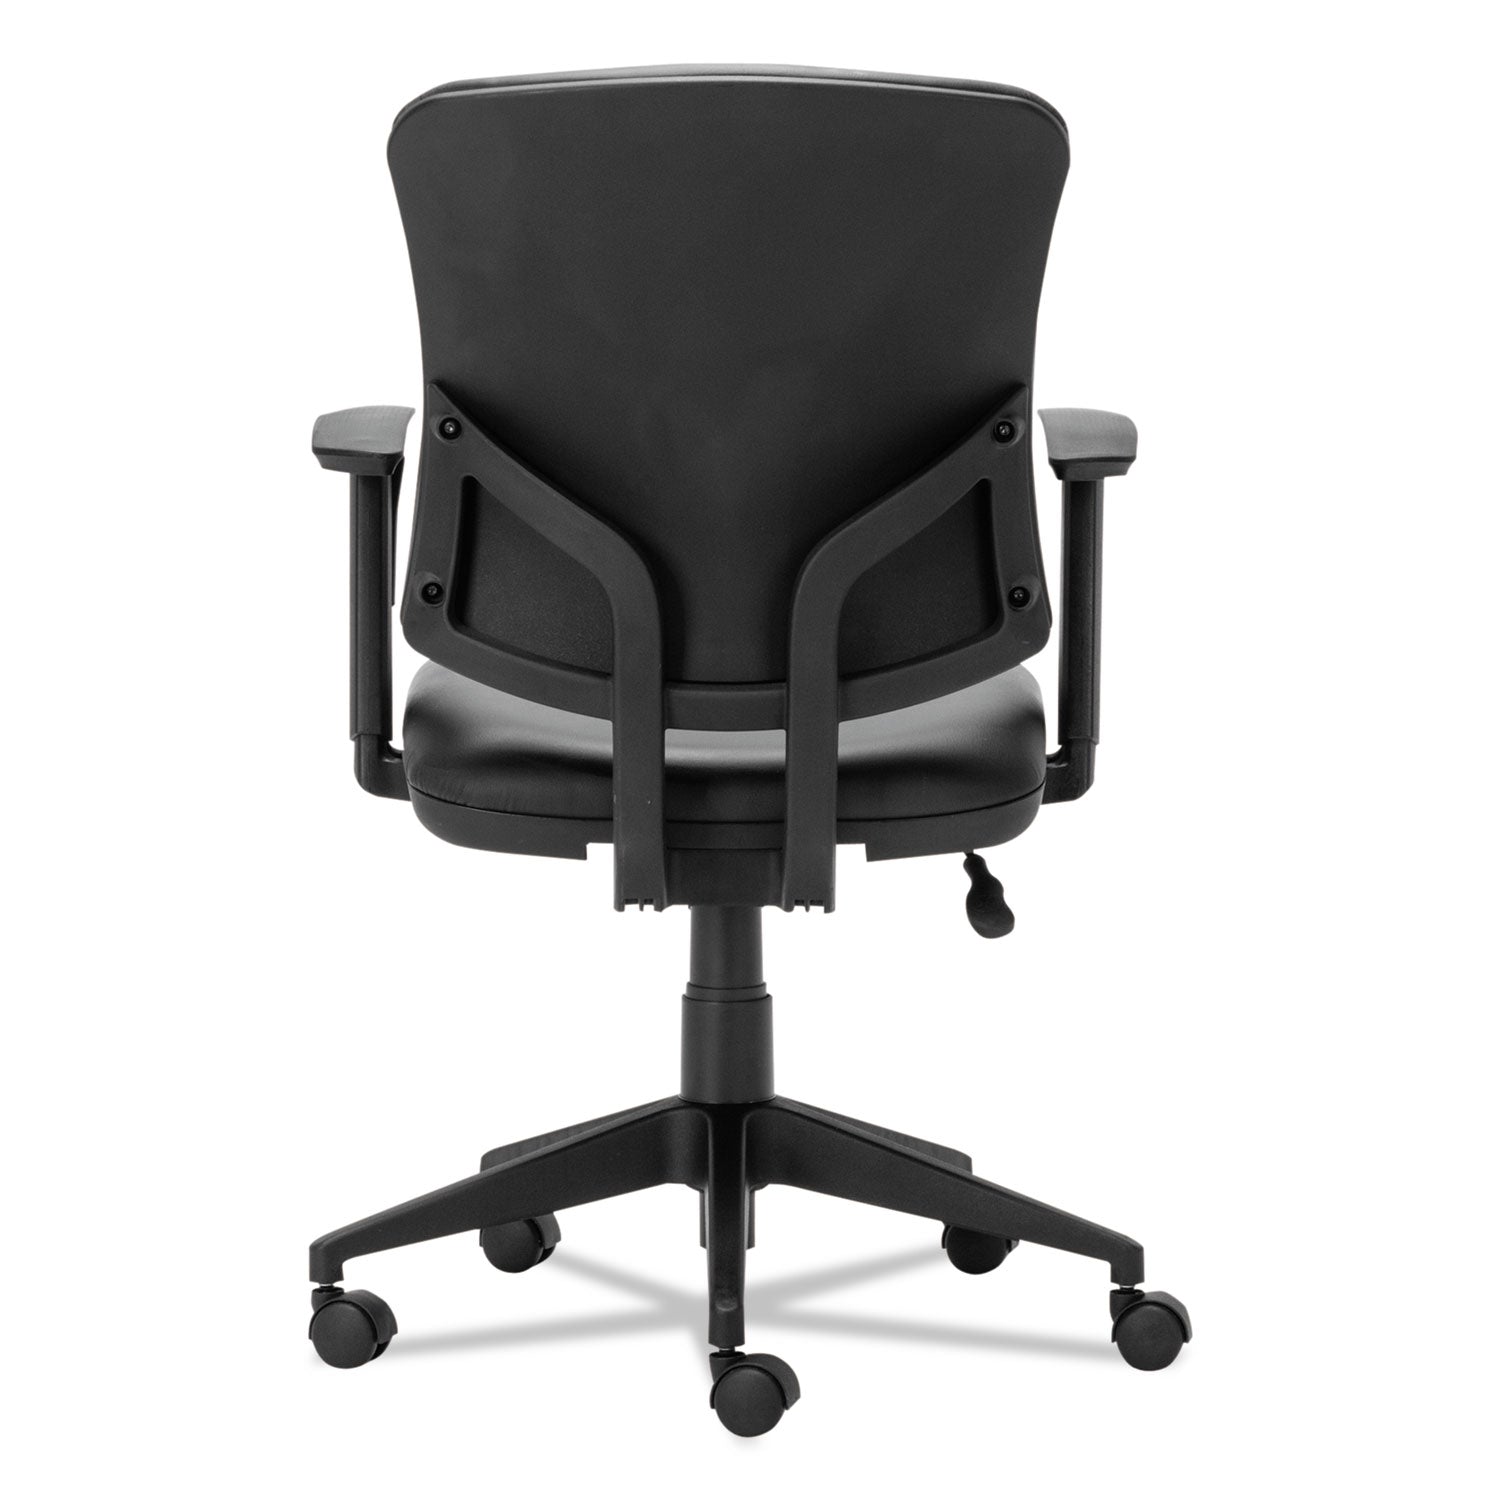 alera-everyday-task-office-chair-bonded-leather-seat-back-supports-up-to-275-lb-176-to-215-seat-height-black_alete4819 - 4